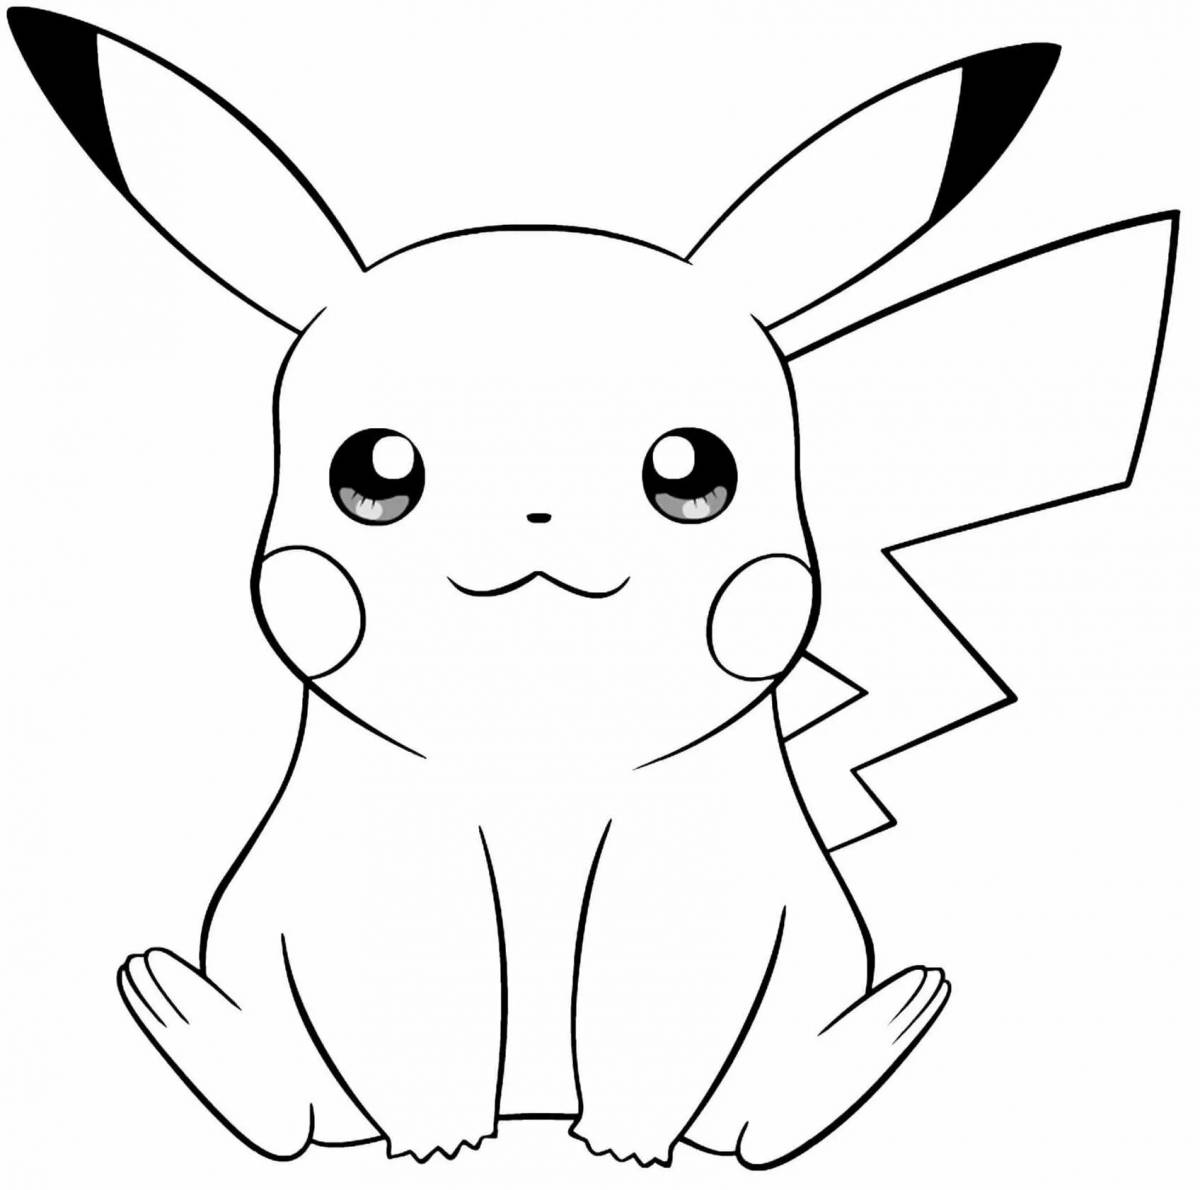 Pikachu in balance coloring page